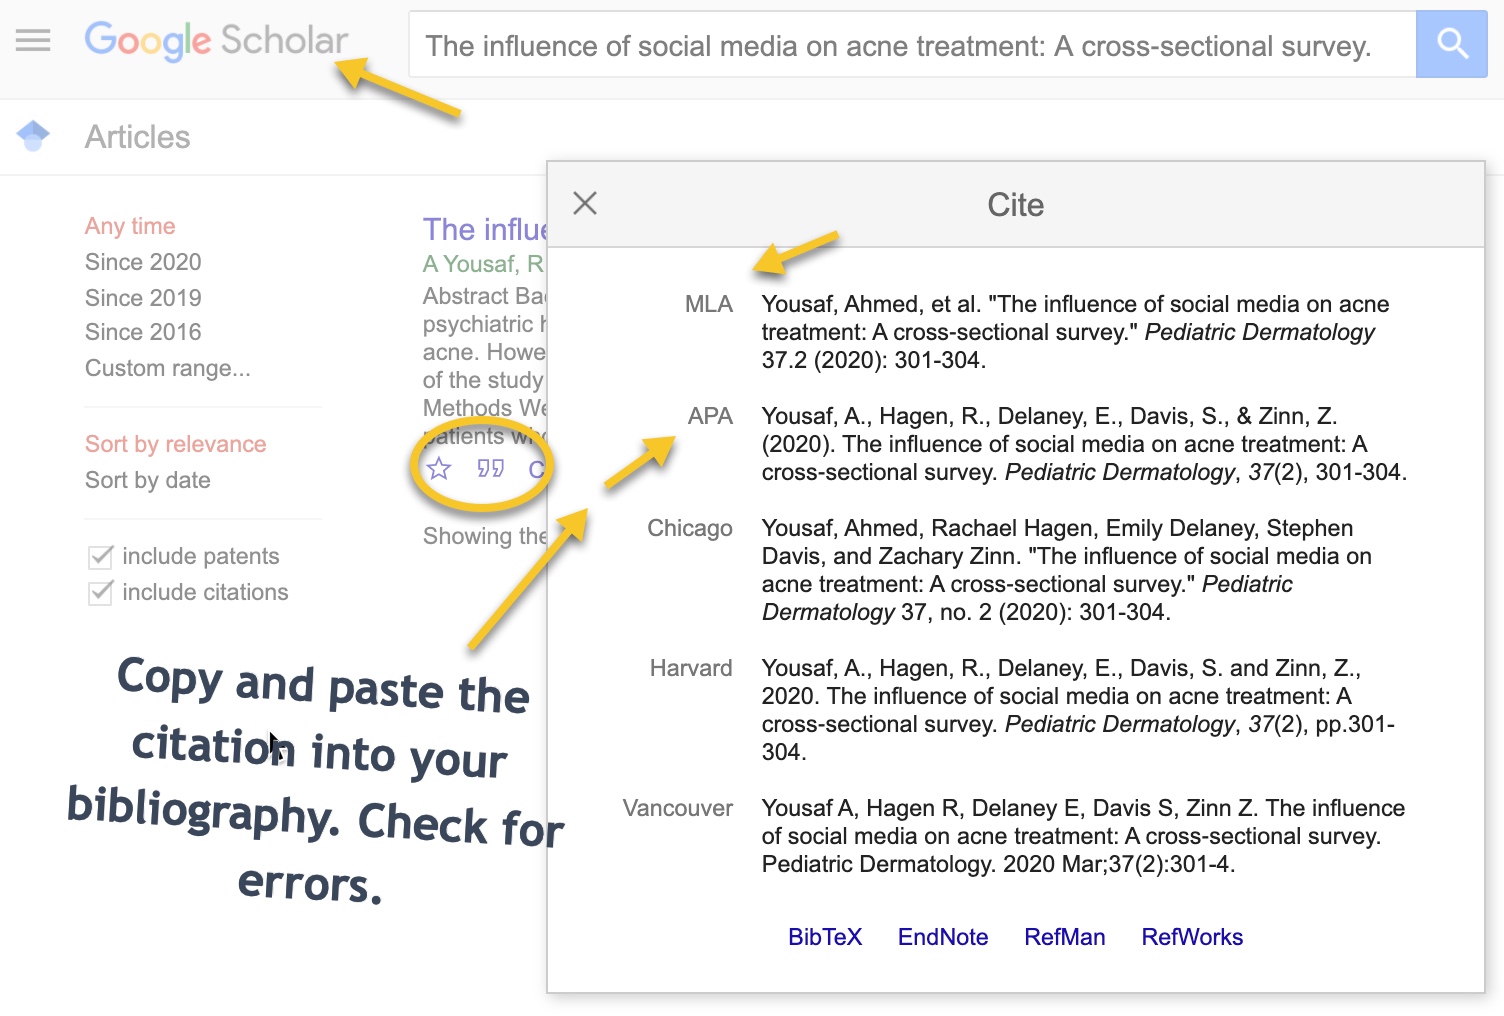 Click the quotes in Google Scholar. Copy and paste citation into your bibliography. Check for errors.